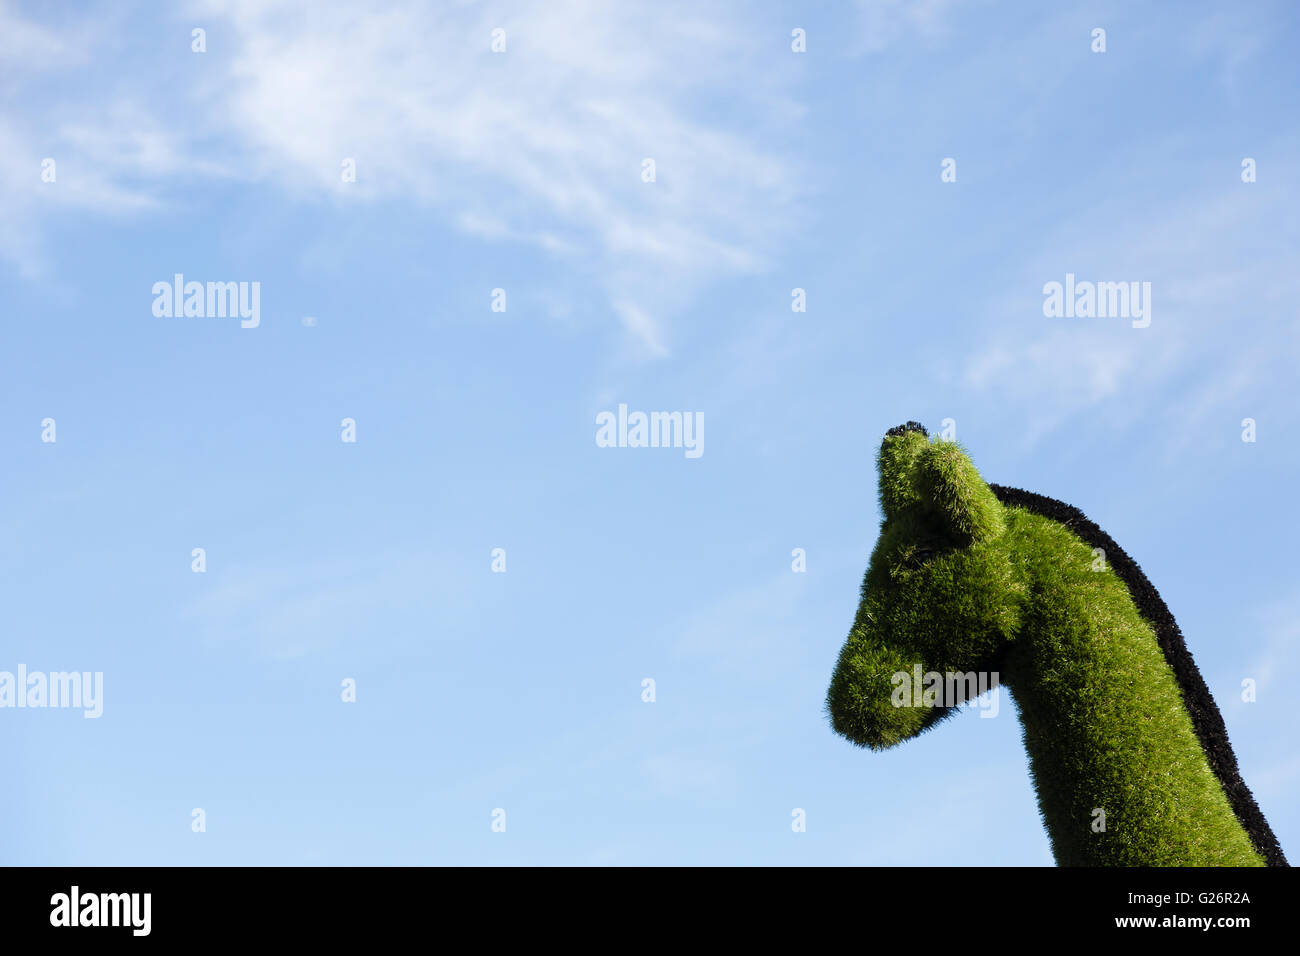 Chelsea Flower Show, London, UK. Giraffe sculpted out of grass against blue sky at the Easigrass stand. Stock Photo